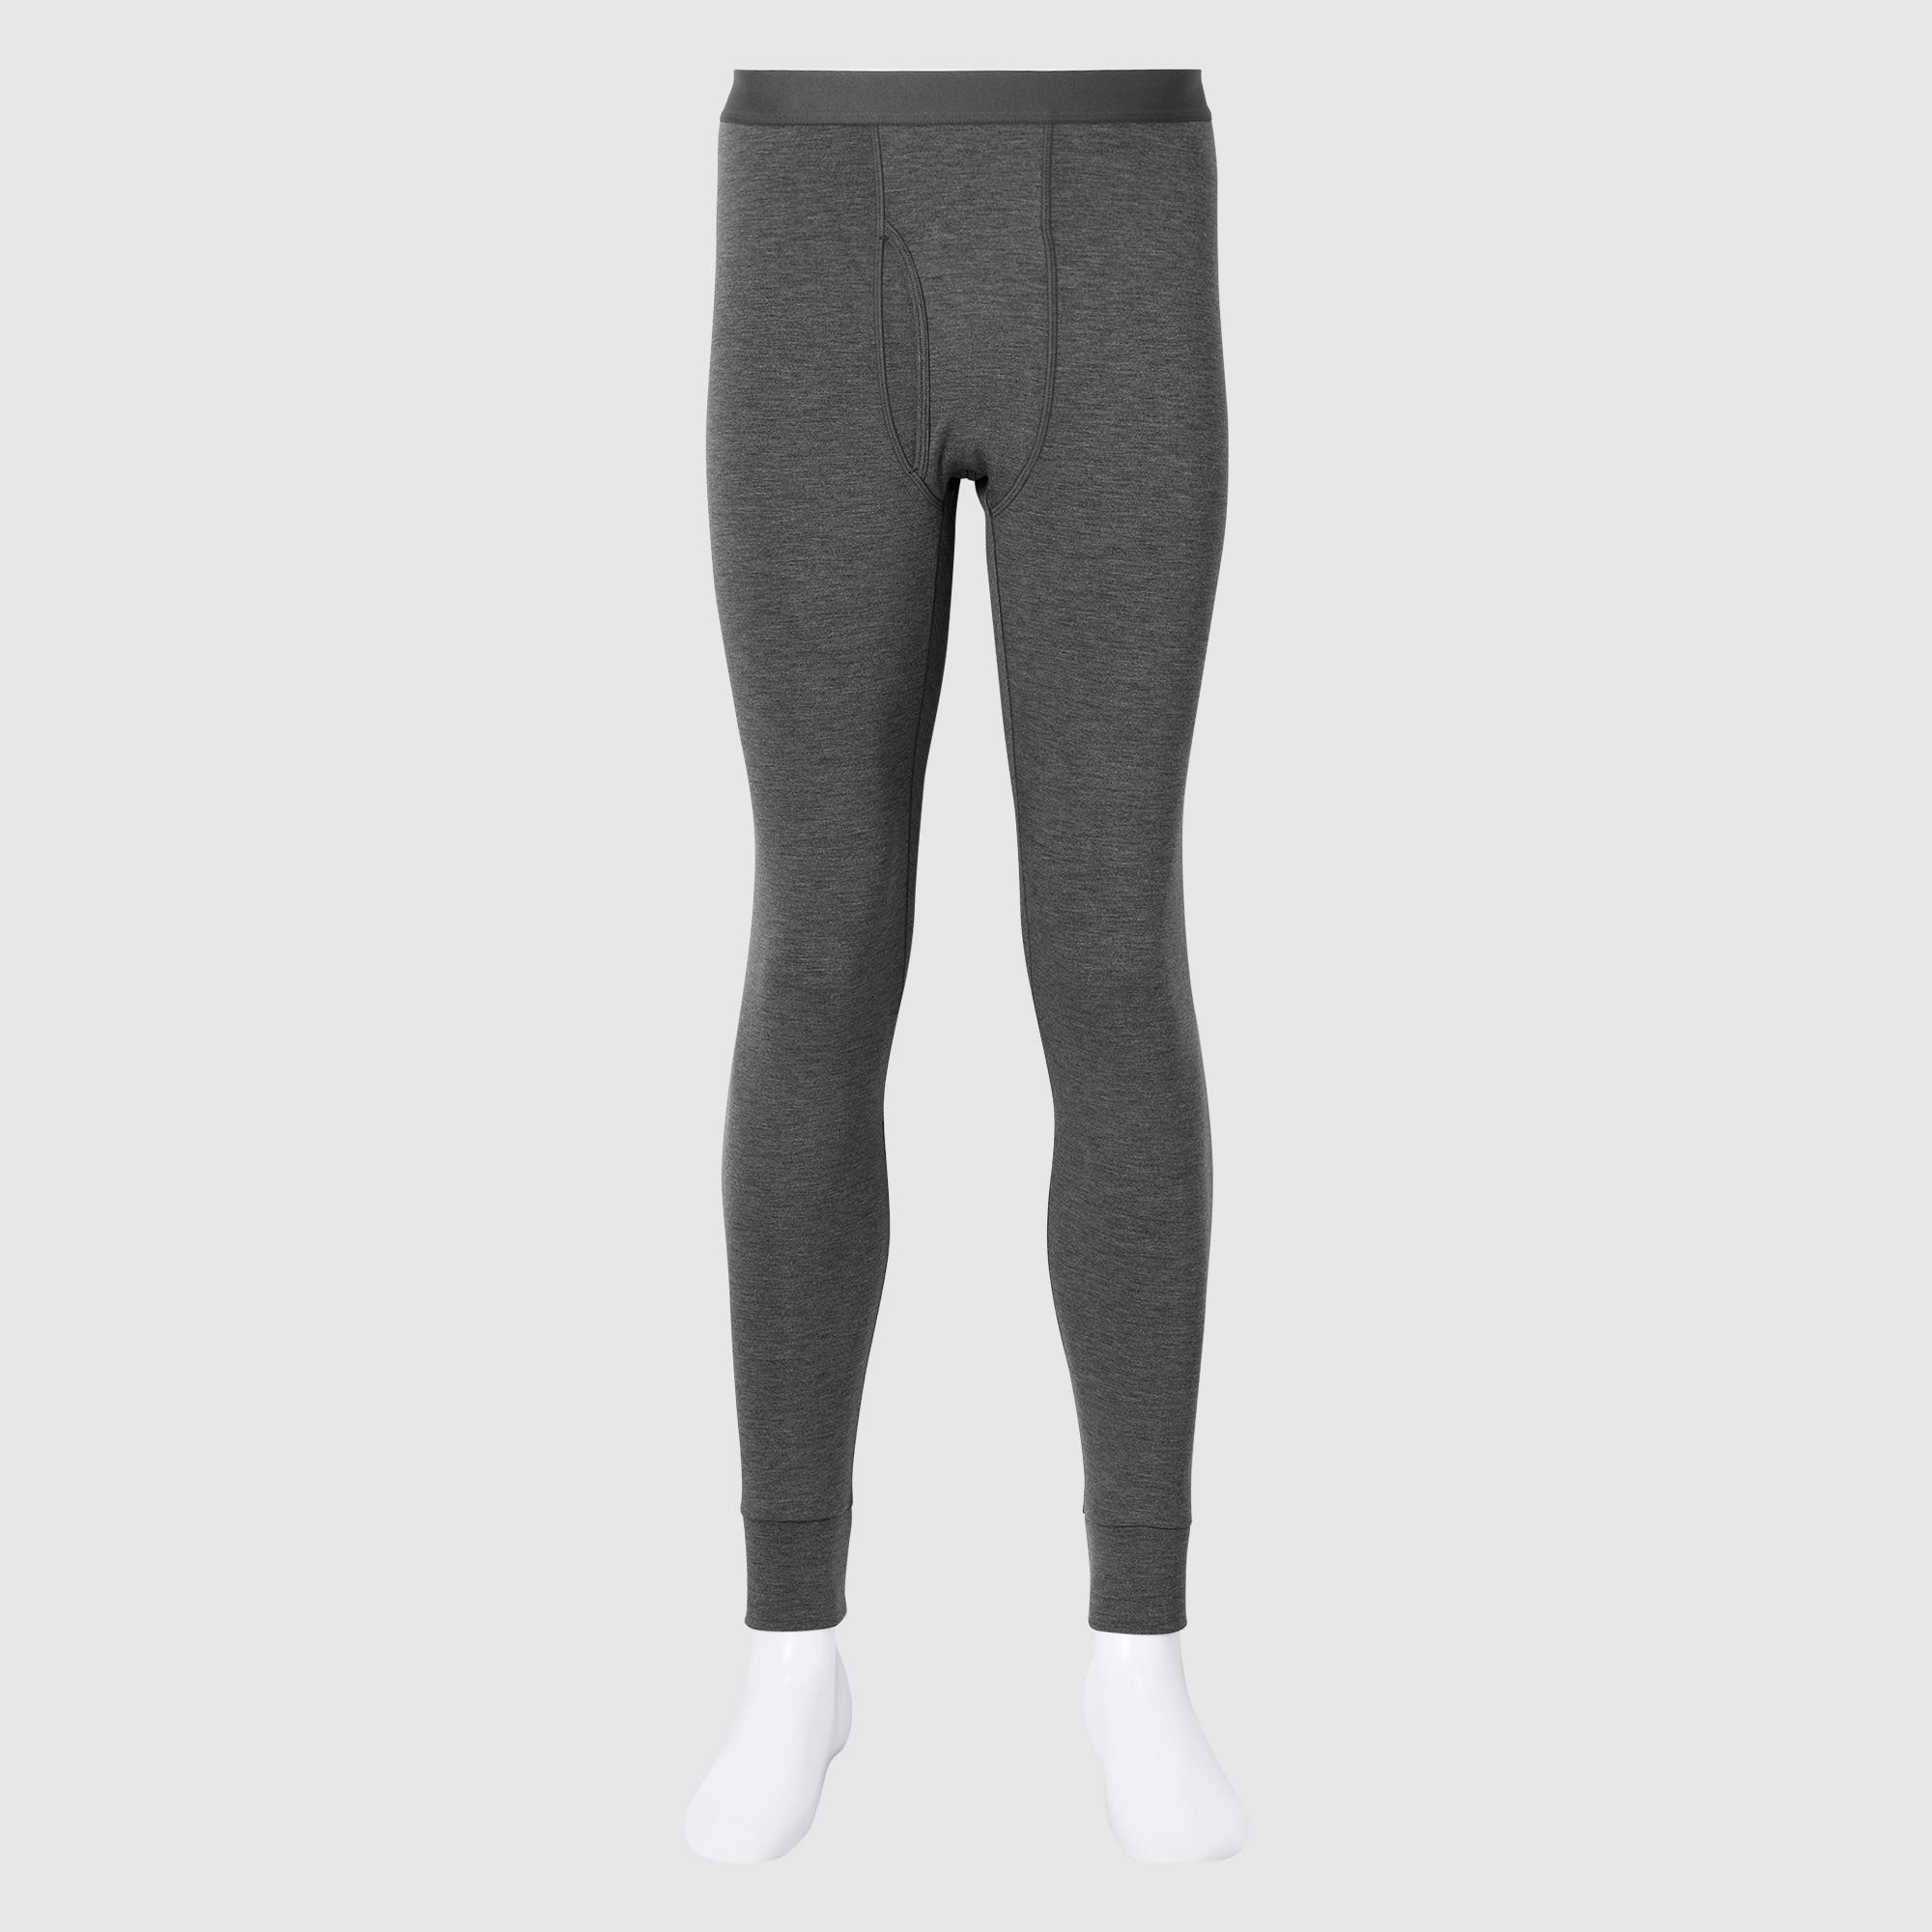 Uniqlo's heattech long johns are cheap, light, comfortable and oh yeah,  really freakin' warm., This is the Loop